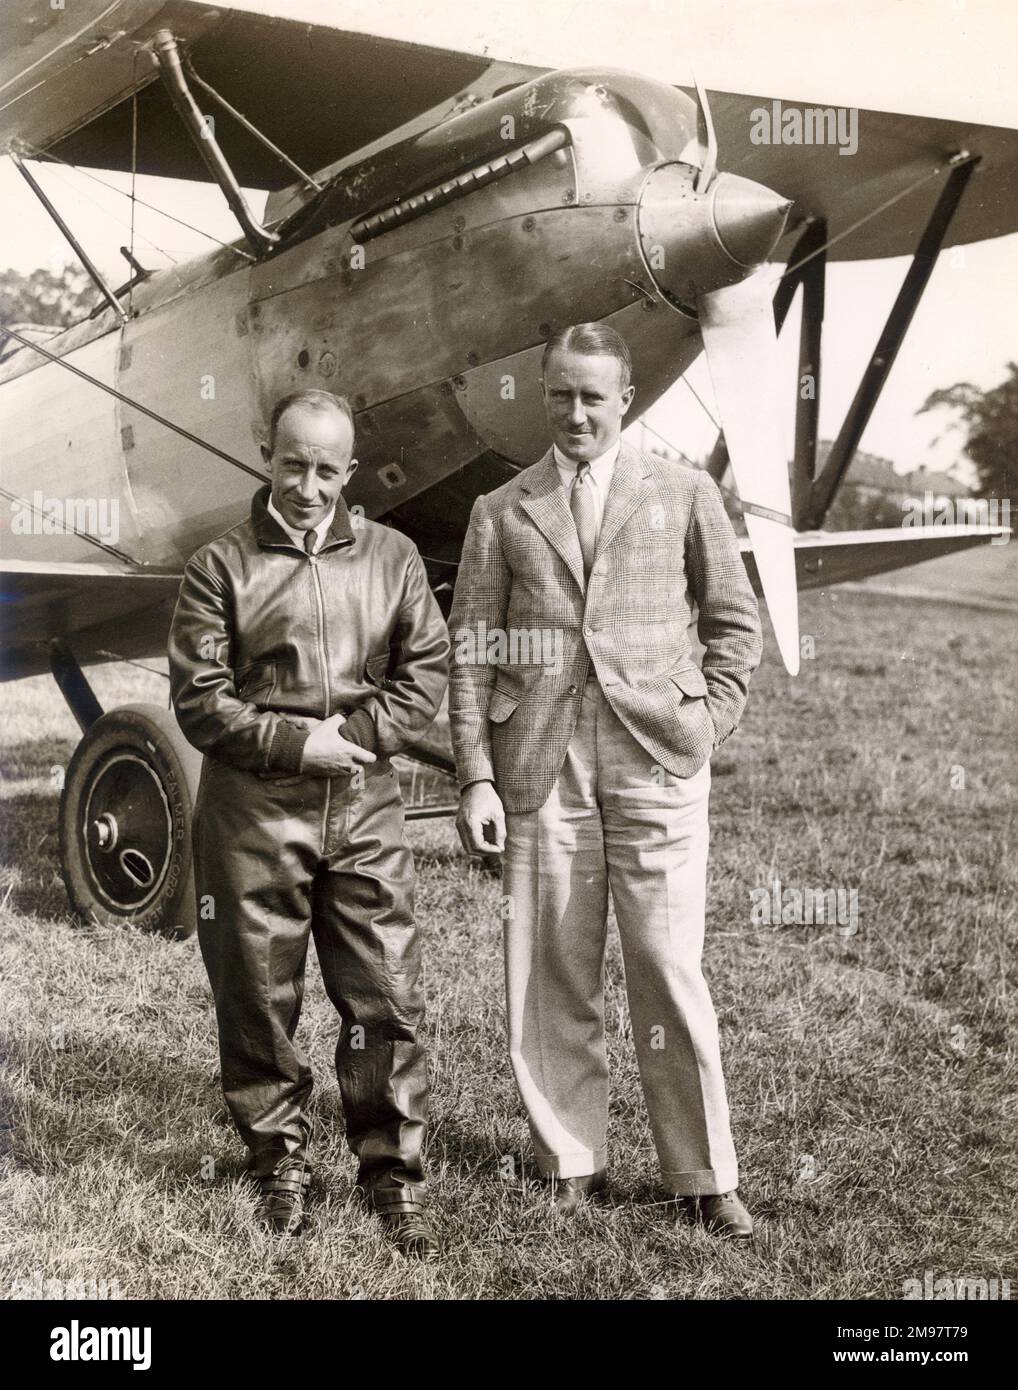 Raymond John Paul Parer, left, and Geoff E. Hemsworth in front of their Fairey Fox I, G-ACXO (formerly J7950), at Hanworth Aerodrome, Middlesex, in September 1934 in preparation for the MacRobertson England to Australia race the following month. Stock Photo